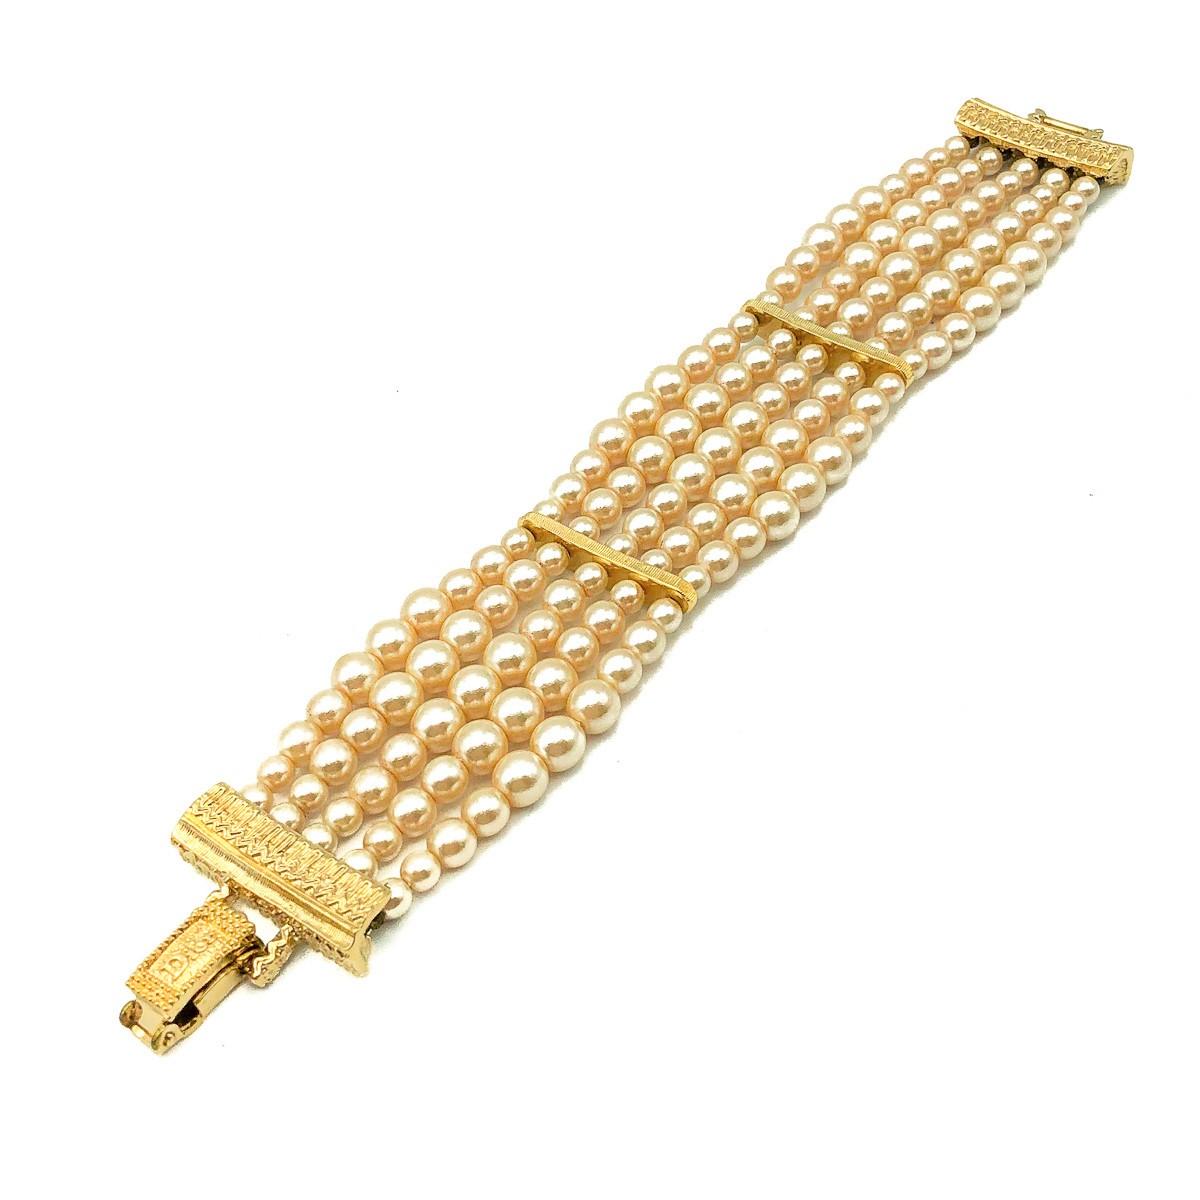 A truly stunning Vintage Dior Pearl Bracelet. Crafted in gold plated metal with graduated glass simulated pearls; attention to detail as always with Dior. Five rows of gorgeous creamy pearls are sectioned with gold plated bars to create a structured